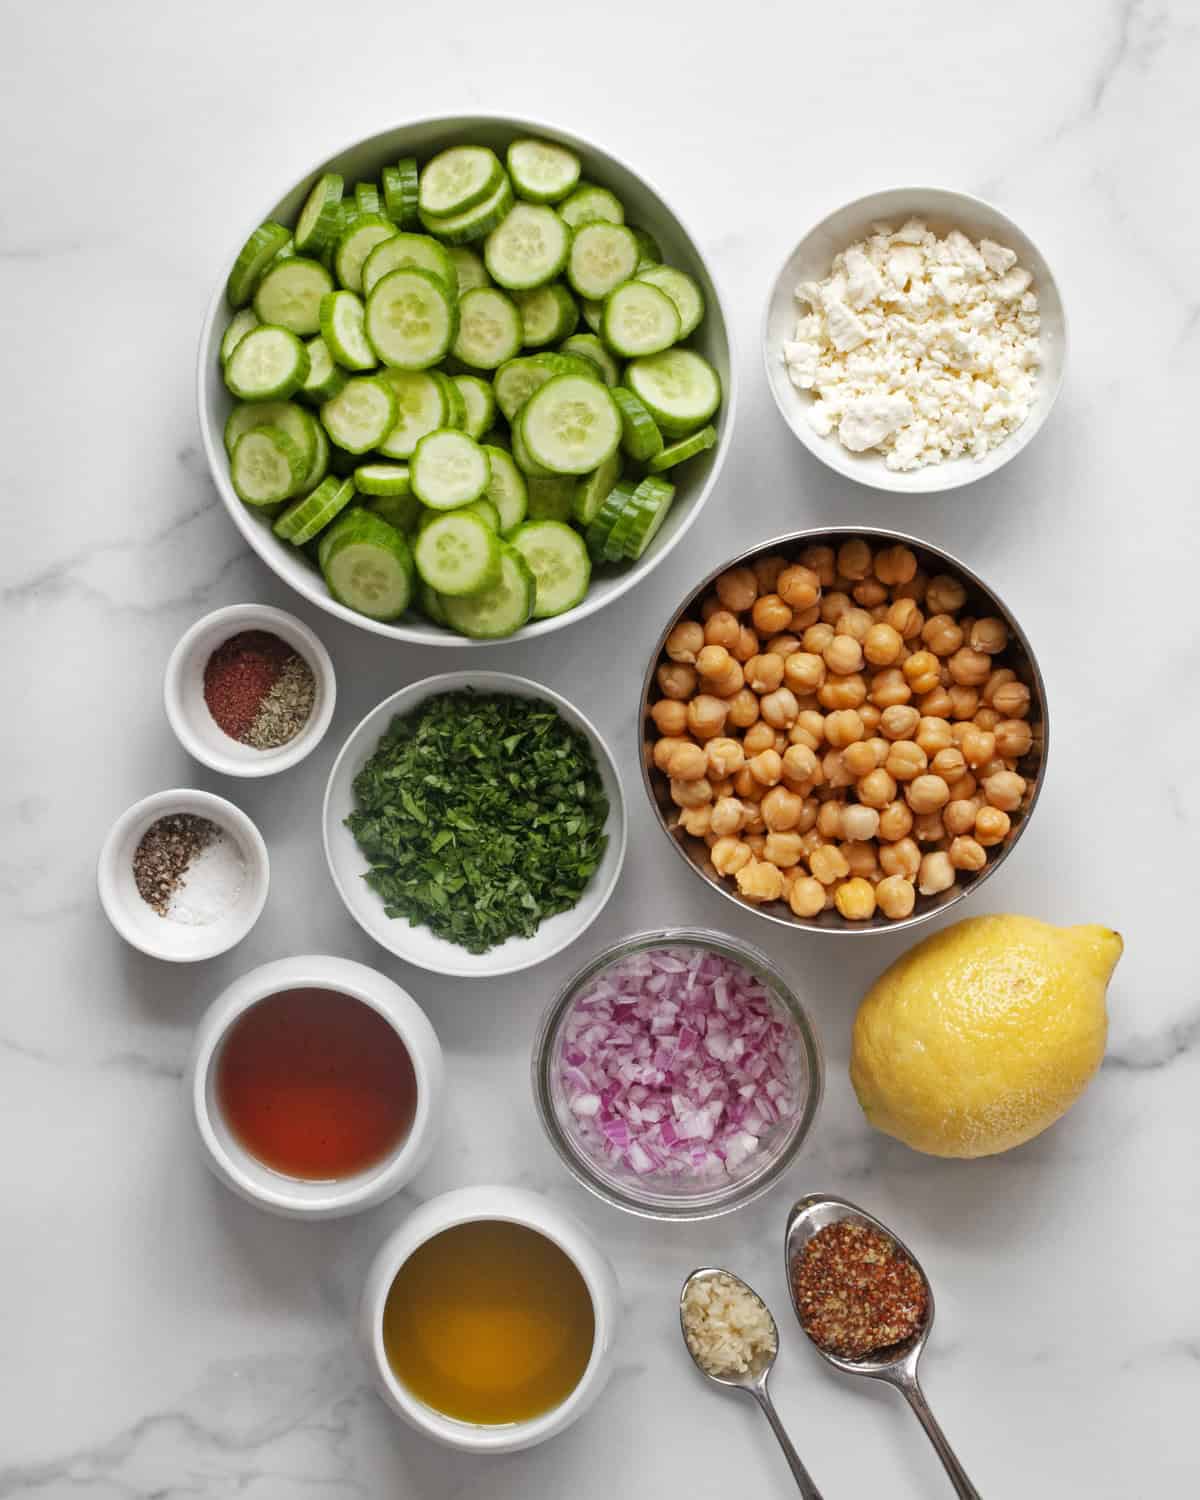 Ingredients including cucumbers, chickpeas, feta, parsley, lemon, red onions, olive oil, vinegar and spices.